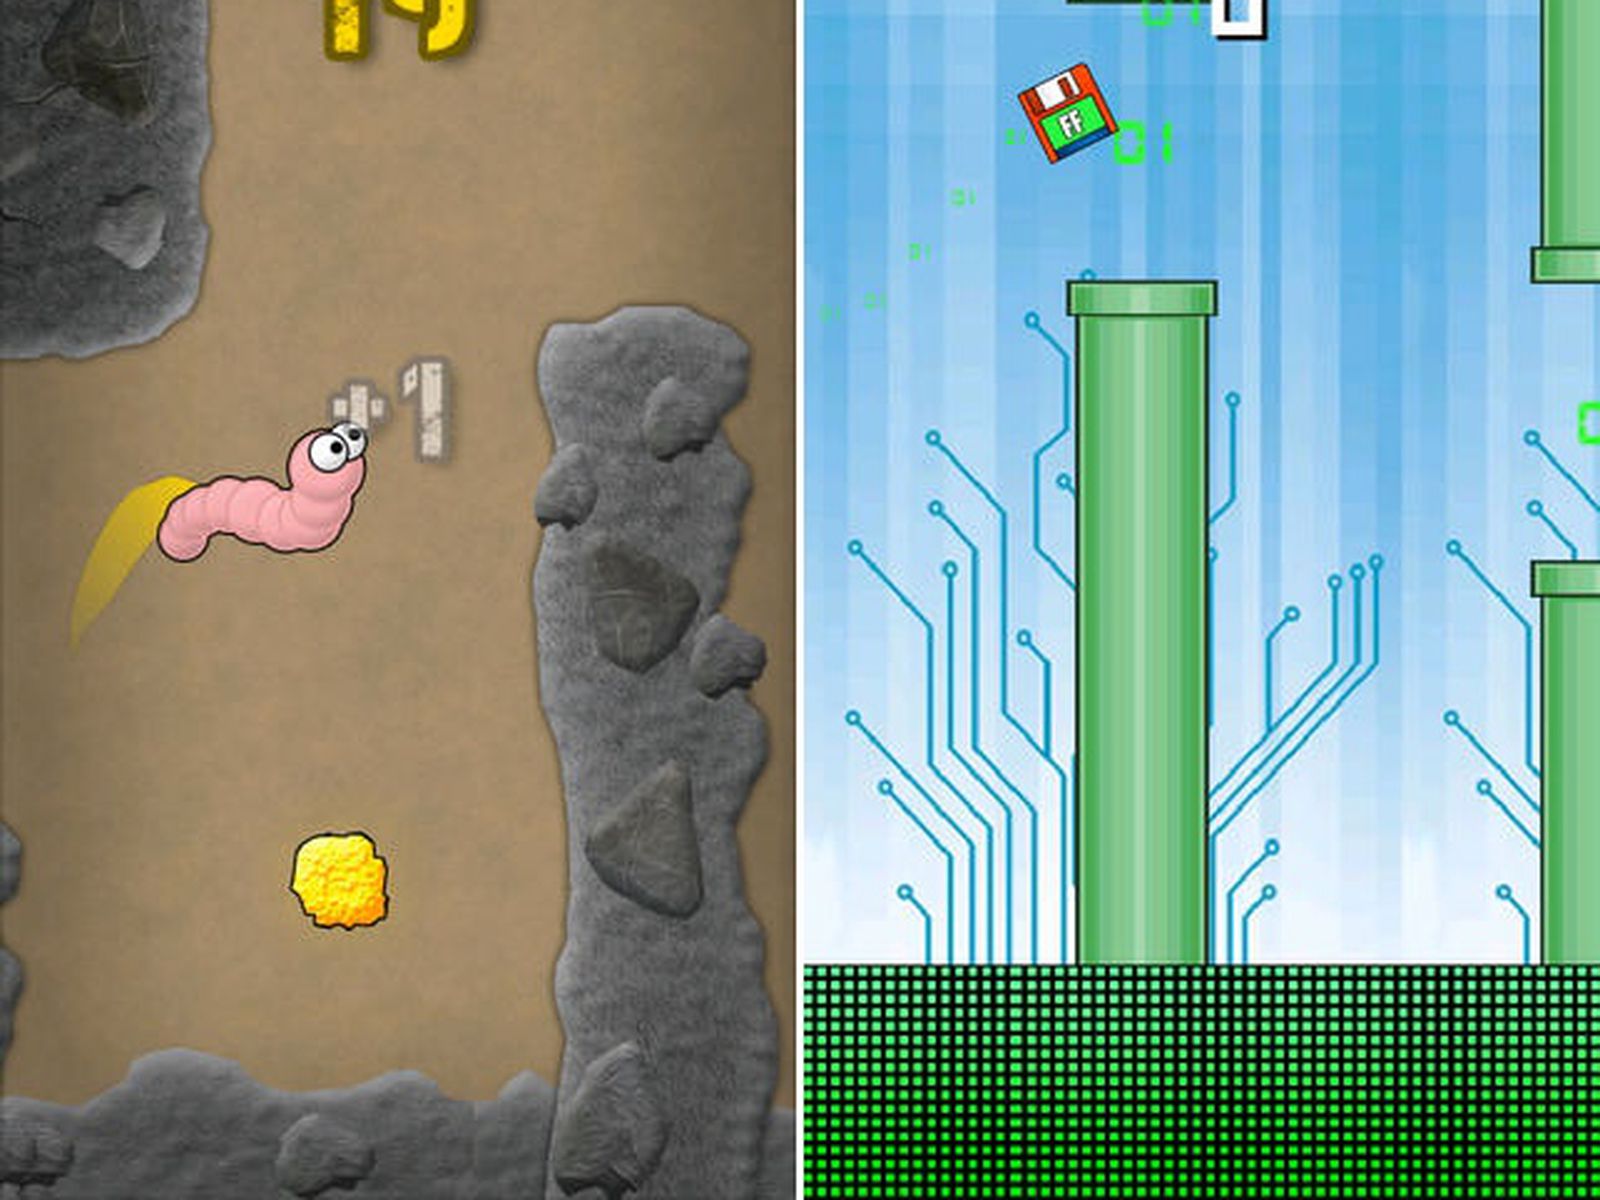 Report: Google rejecting Flappy bird clones for being 'spam' - Polygon